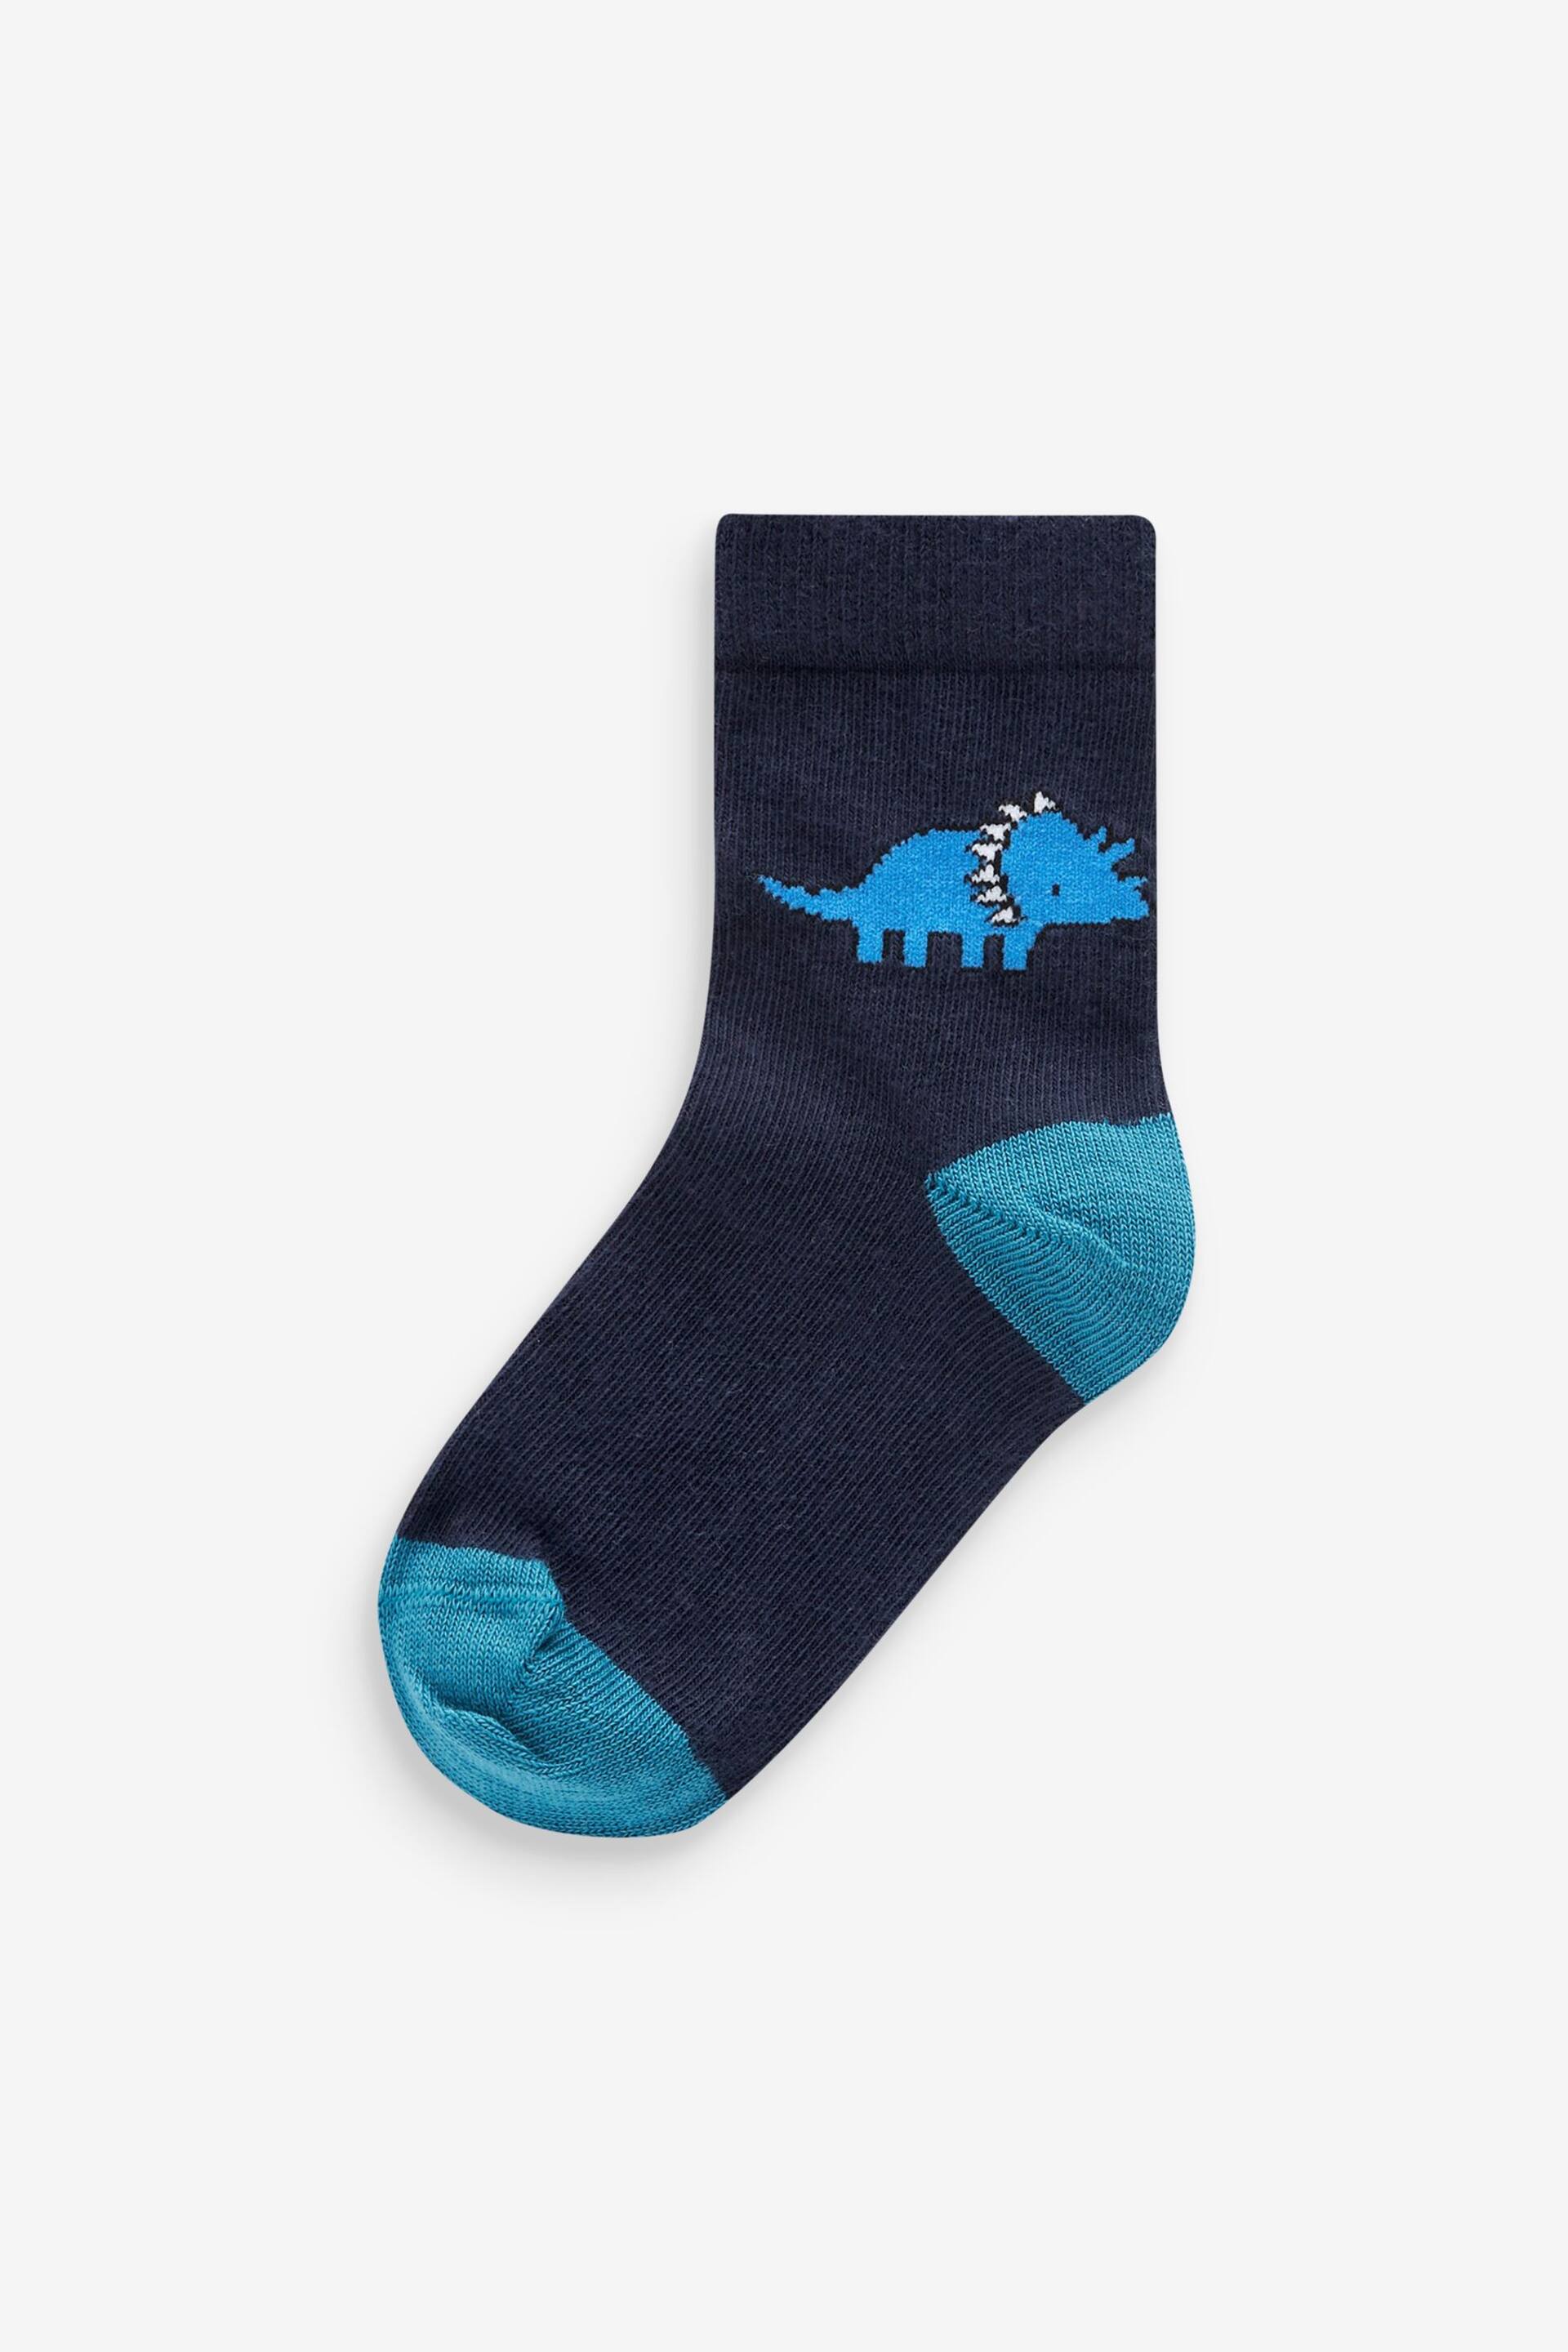 Blue Dino Cotton Rich Socks 7 Pack - Image 2 of 8